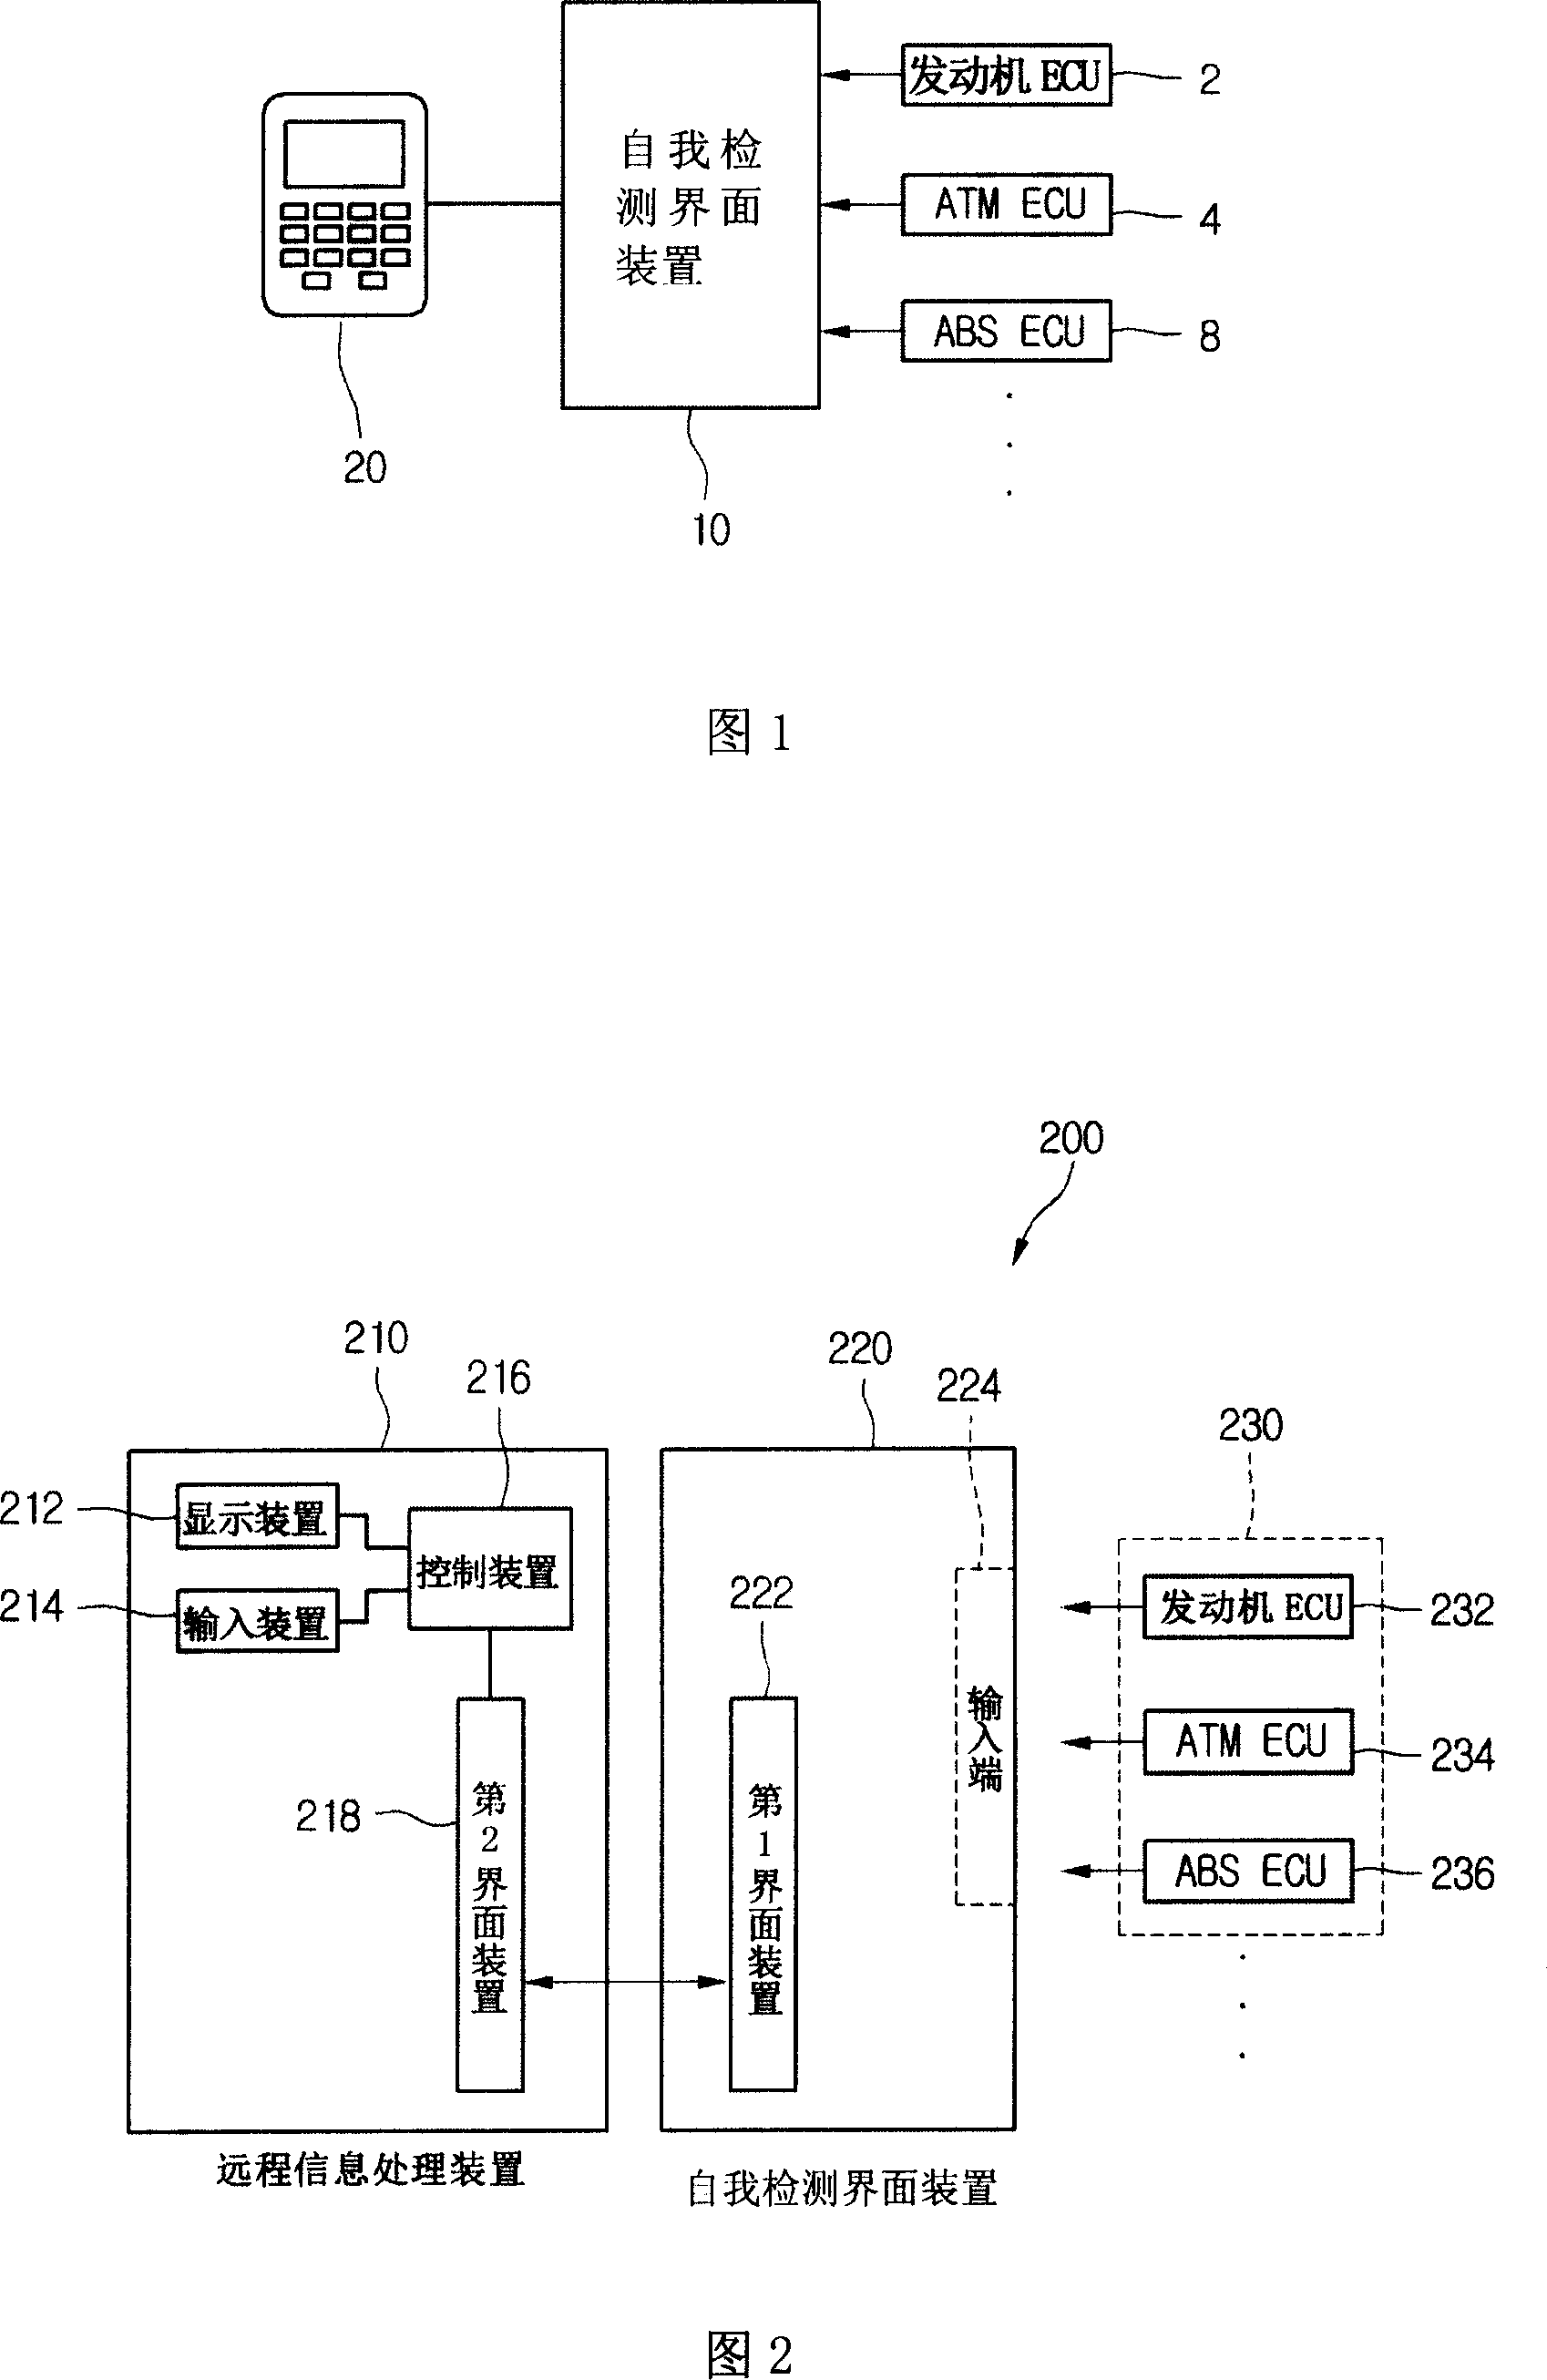 Self-detection system and method of car of using remote information process device